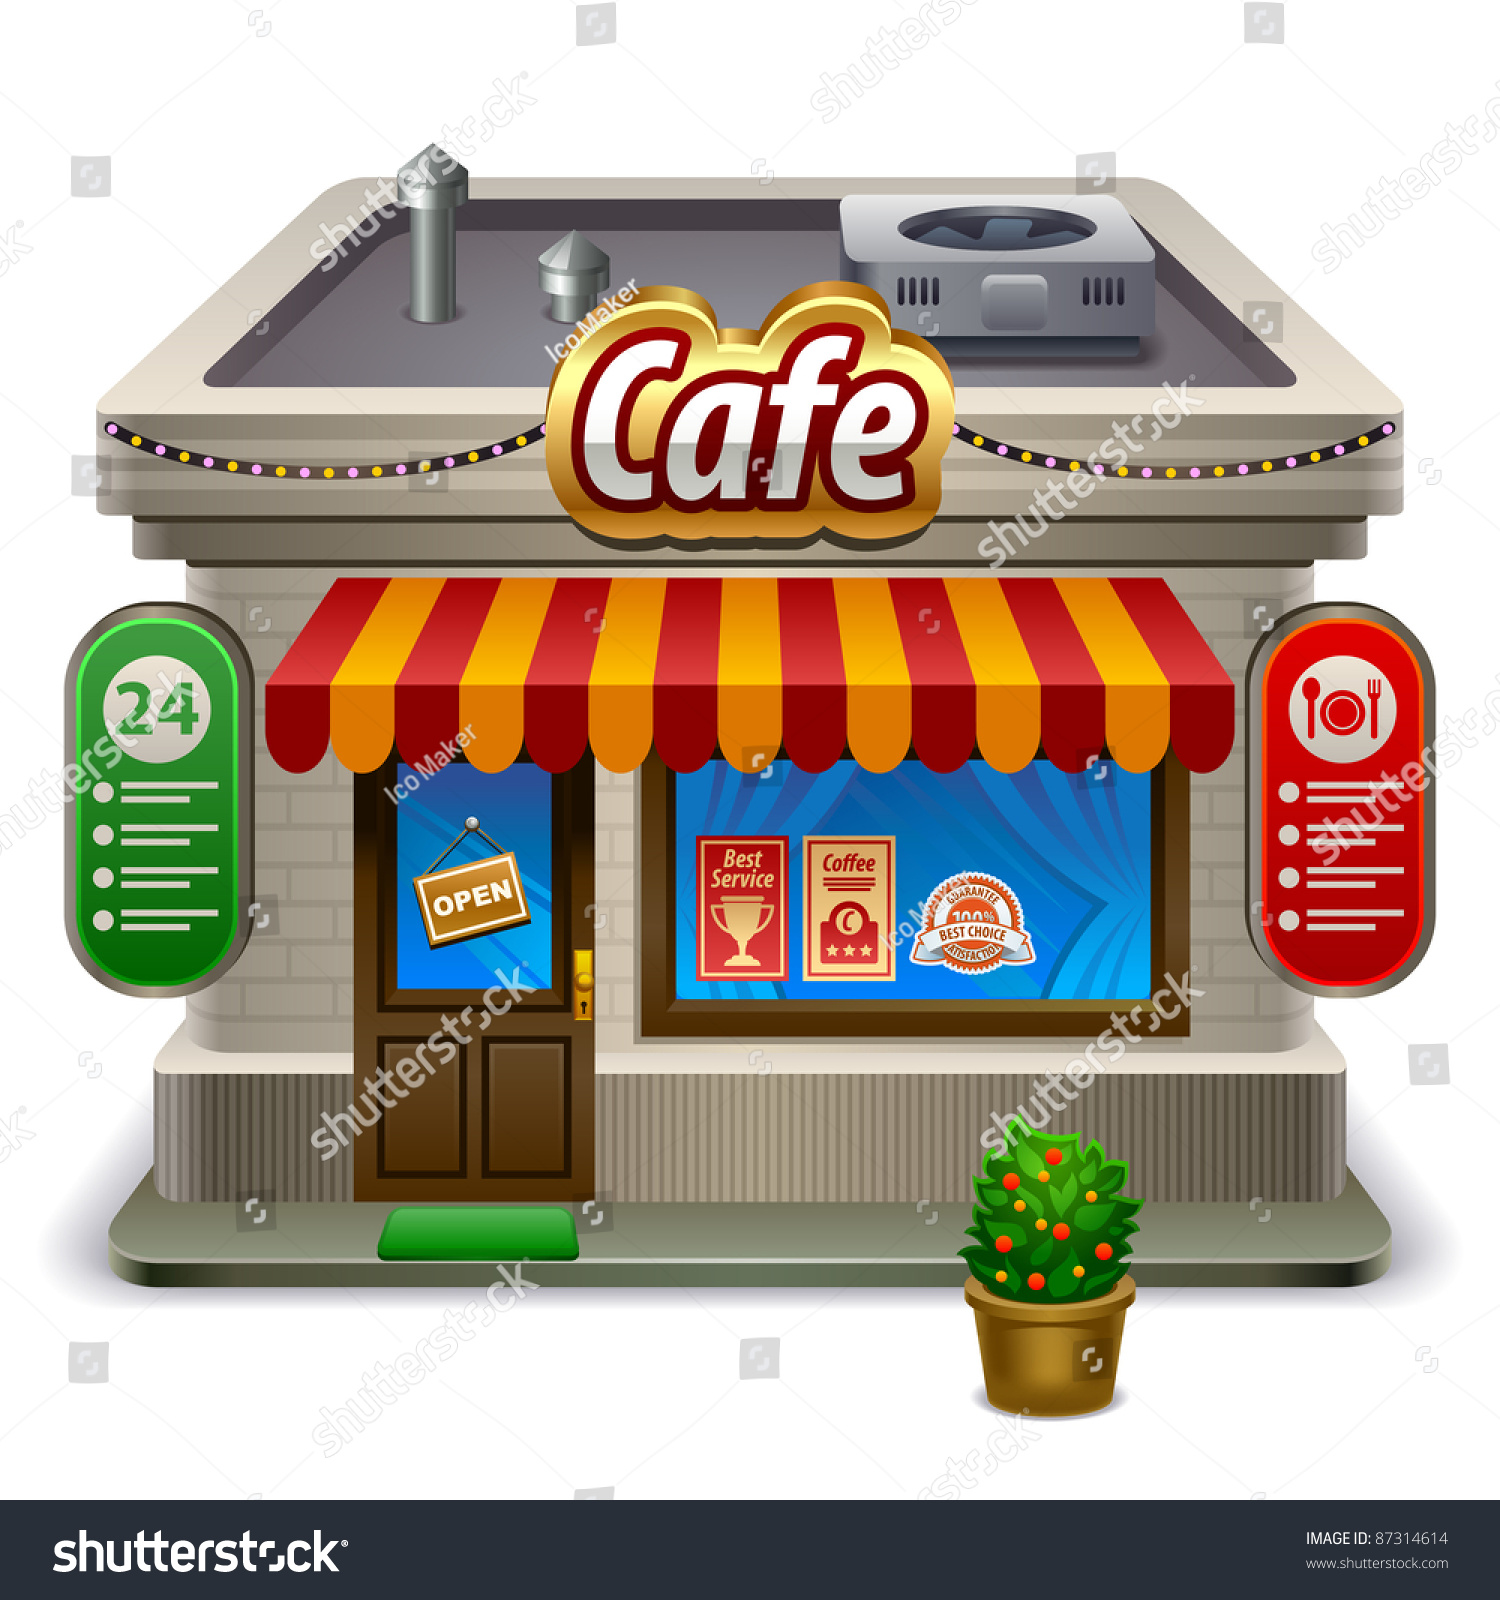 cafe clipart images - photo #50